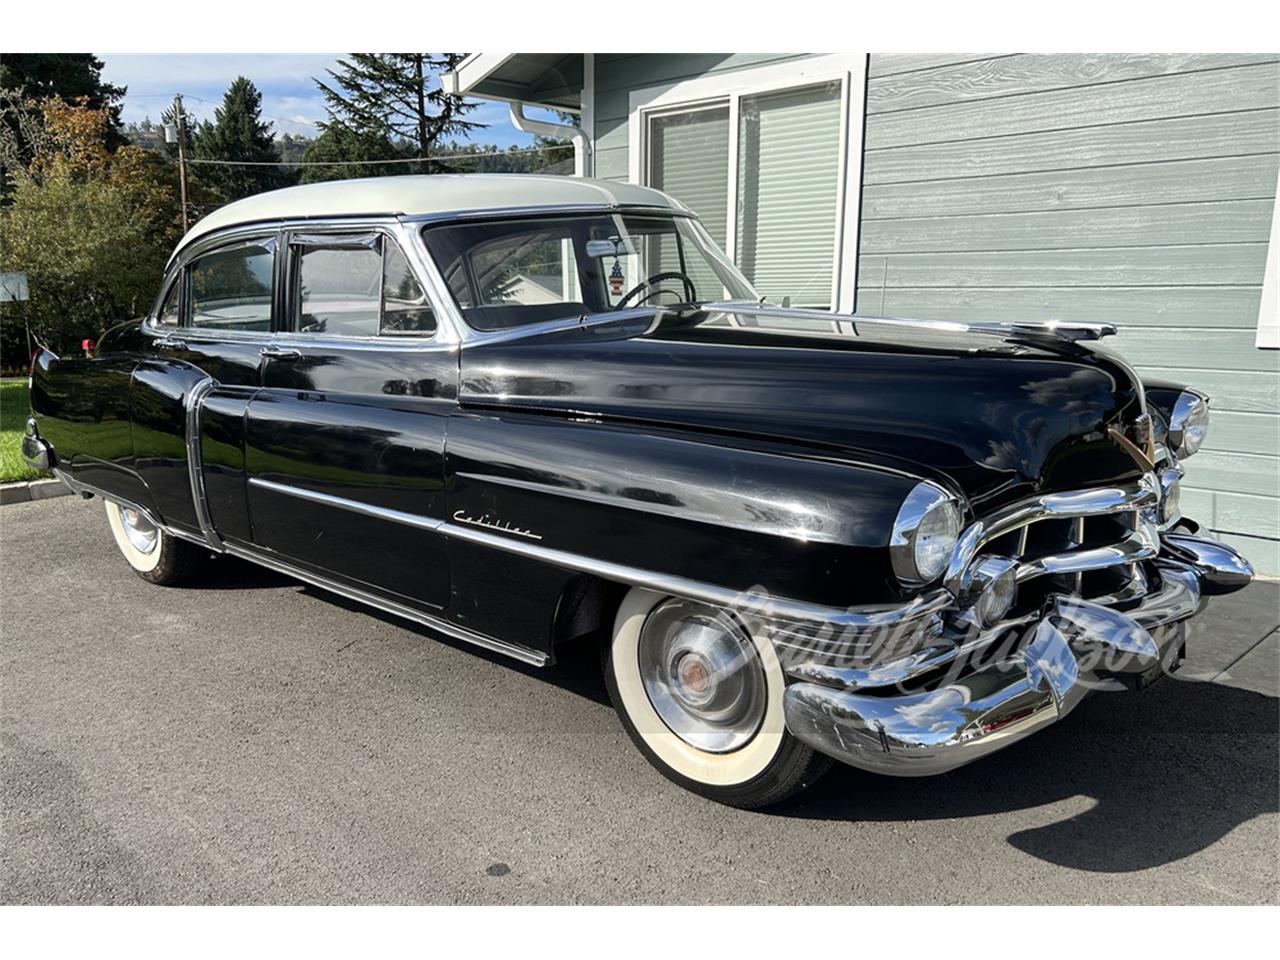 For Sale at Auction: 1952 Cadillac Series 62 in Scottsdale, Arizona for sale in Scottsdale, AZ